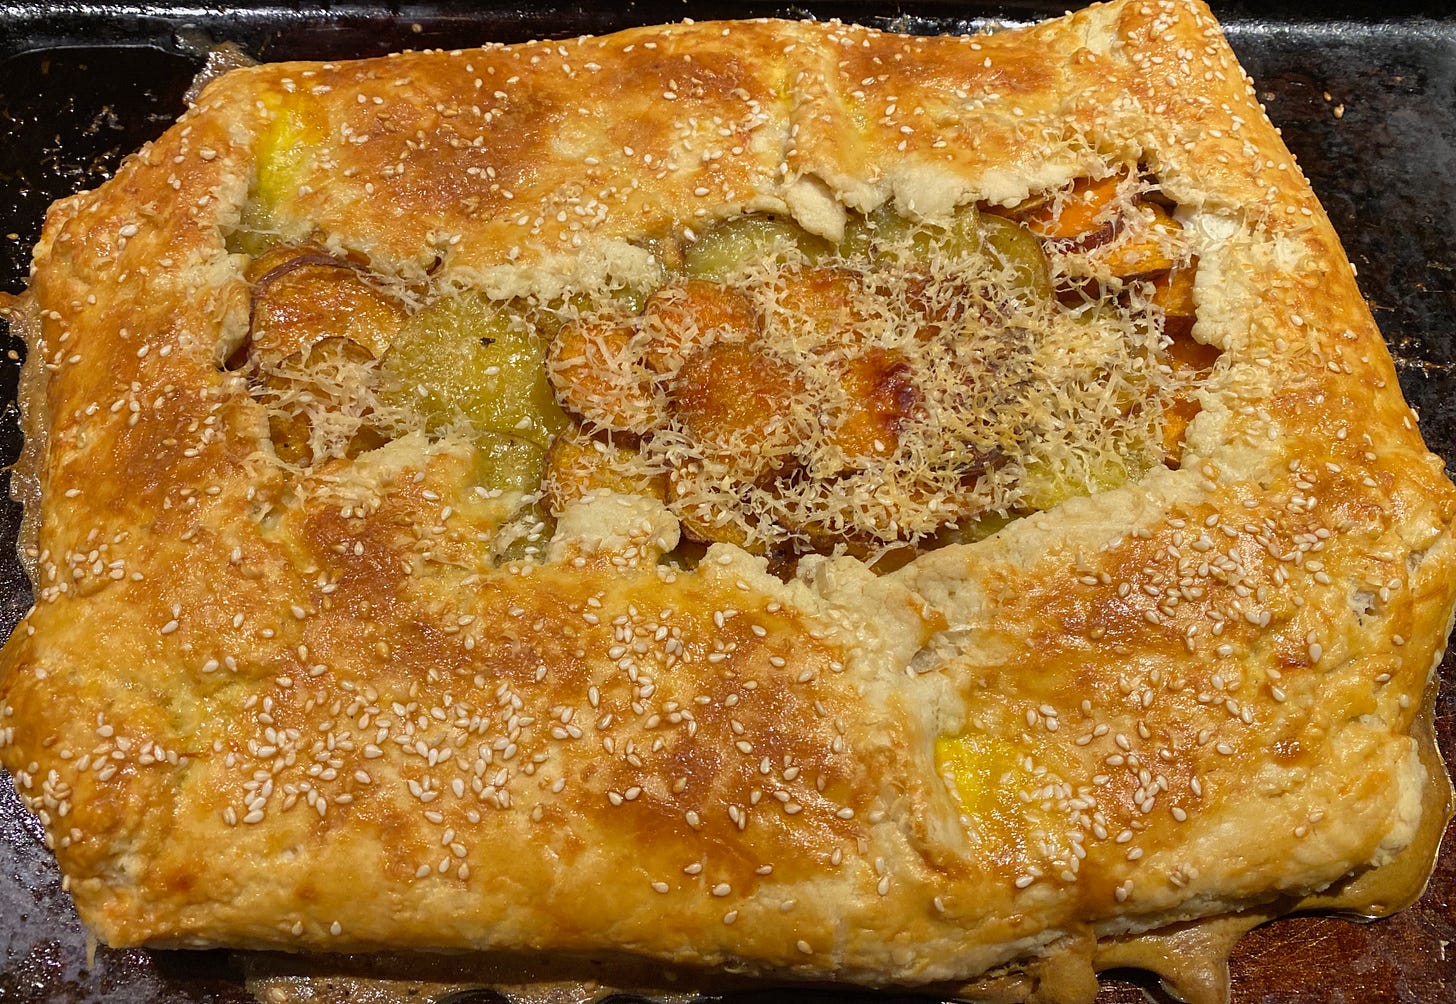 A golden brown rectangular galette sprinkled with sesame seeds; layers of thinly sliced potatoes and sweet potatoes peek out of the middle.